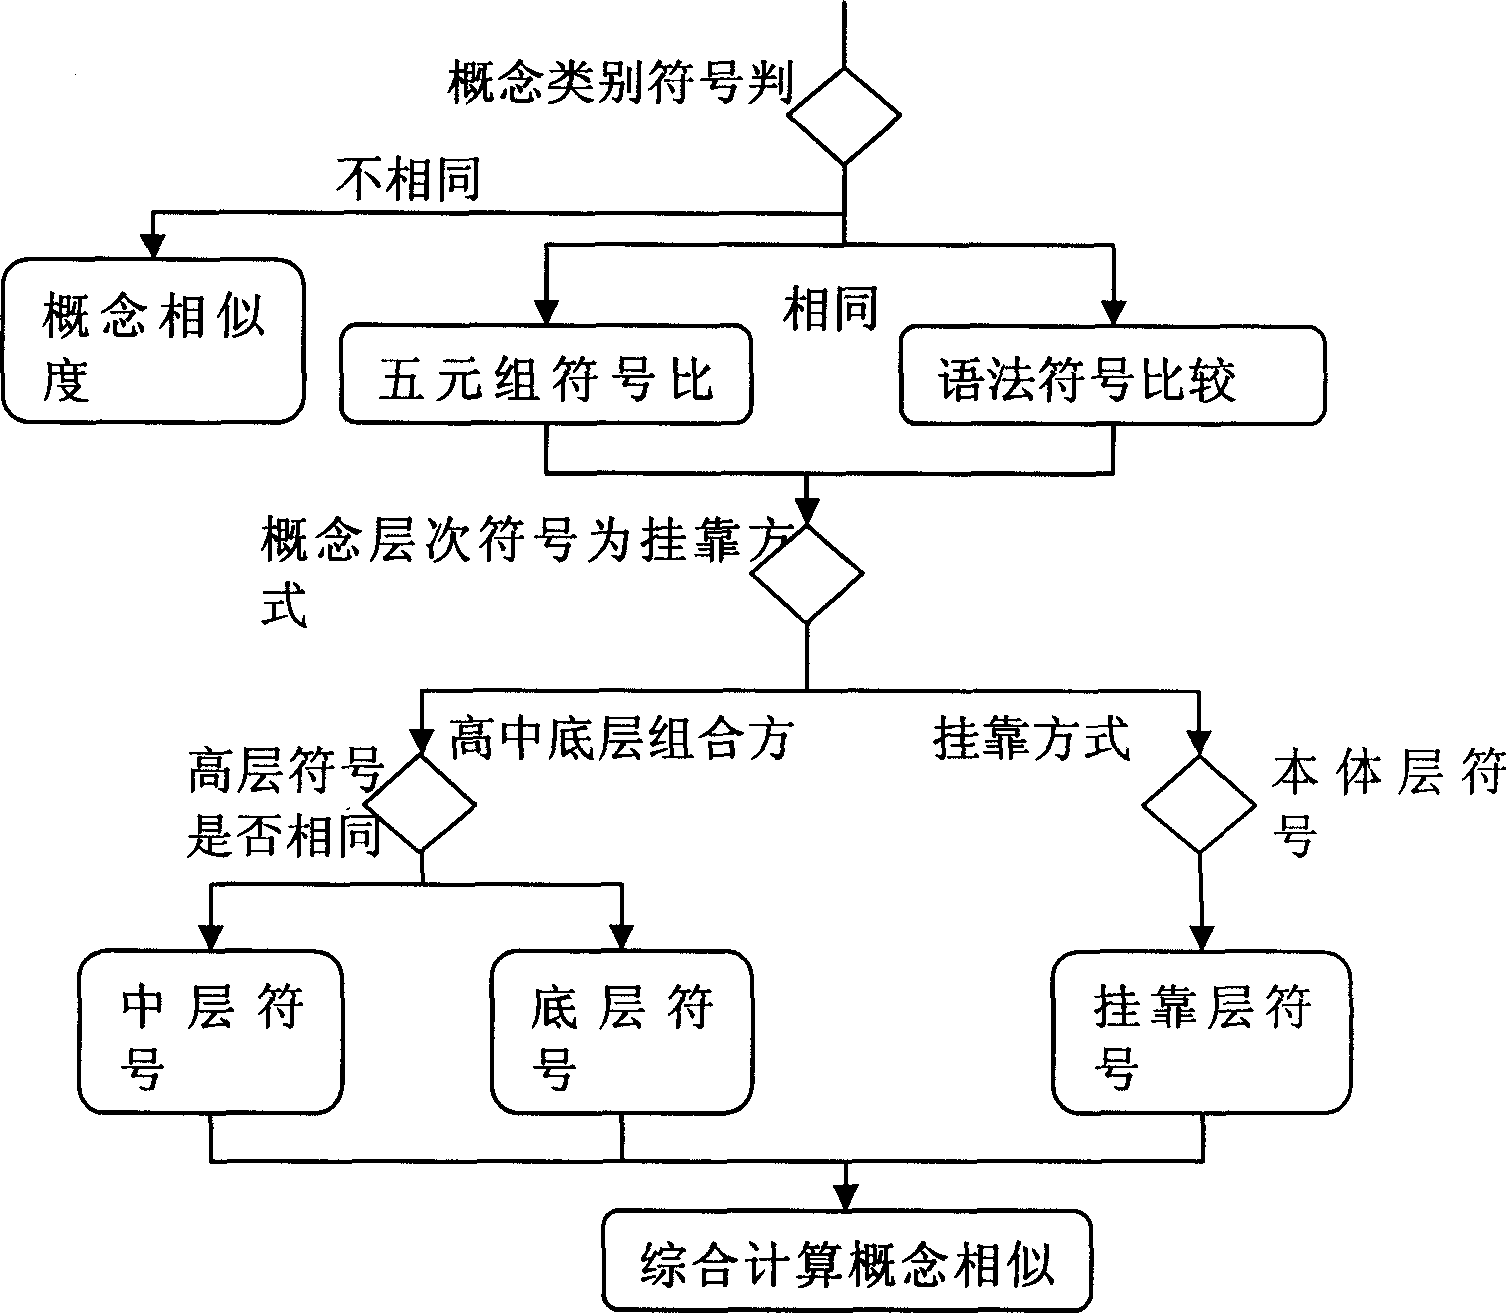 Computer information retrieval system based on natural speech understanding and its searching method